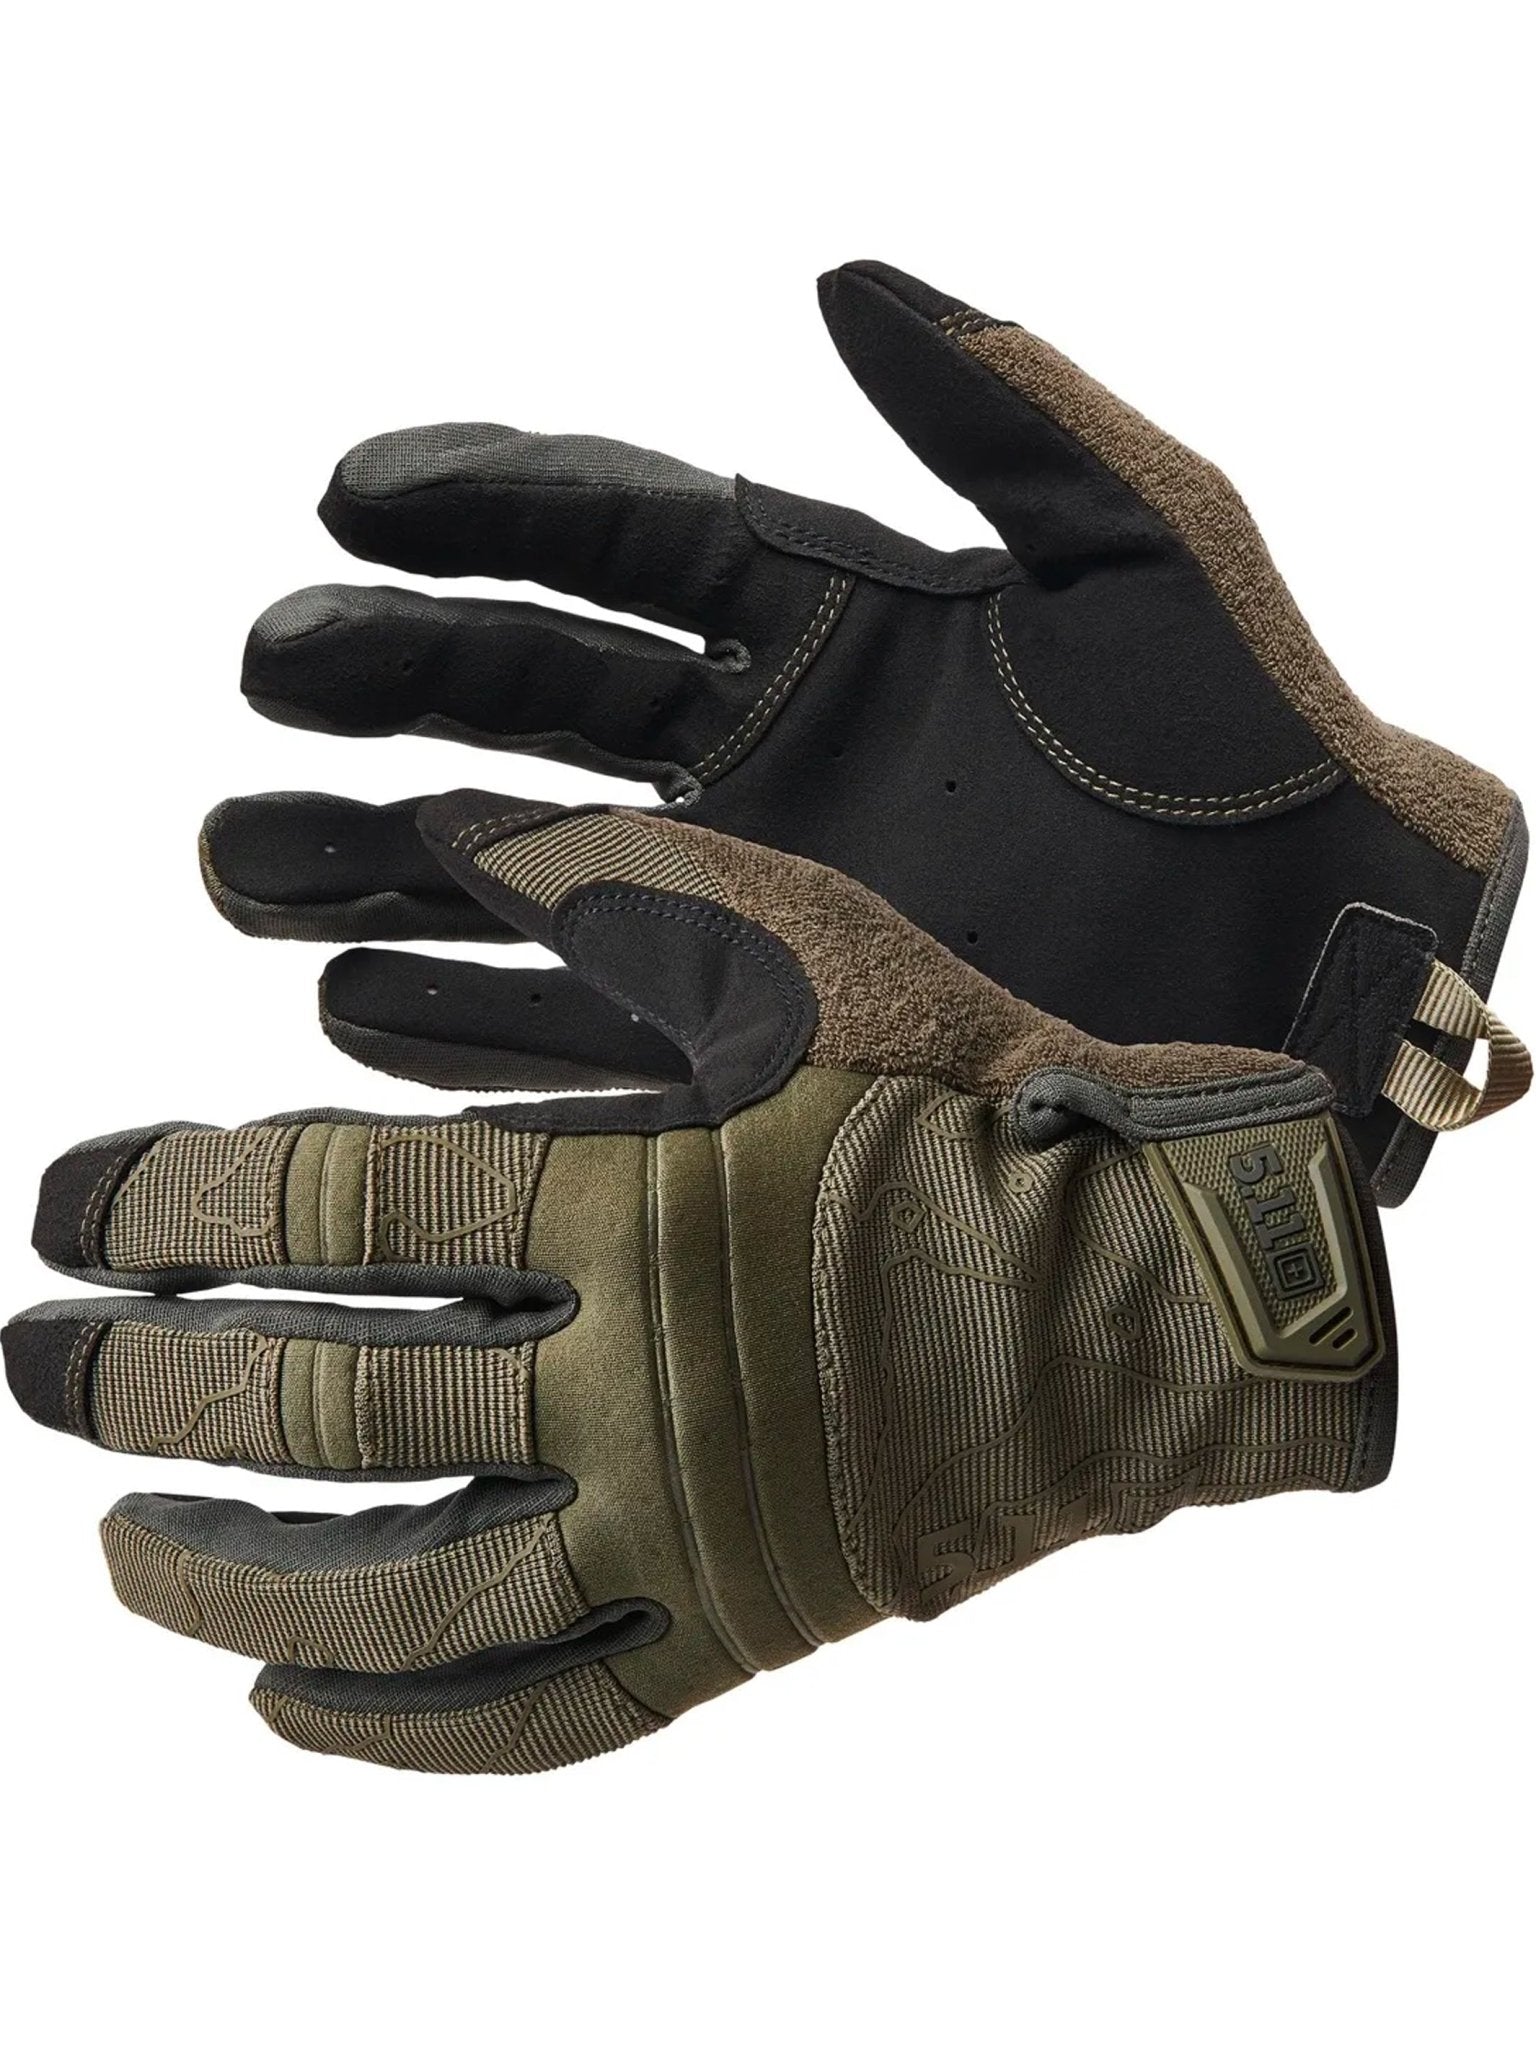 4elementsclothing5.11 Tactical5.11 Tactical - 5.11 COMPETITION SHOOTING 2.0 GLOVE - Touchscreen taper wrap gloves, Nylon EN388:2016- 3111X; EN ISO 21420 - Style 59394Gloves59394-186-S